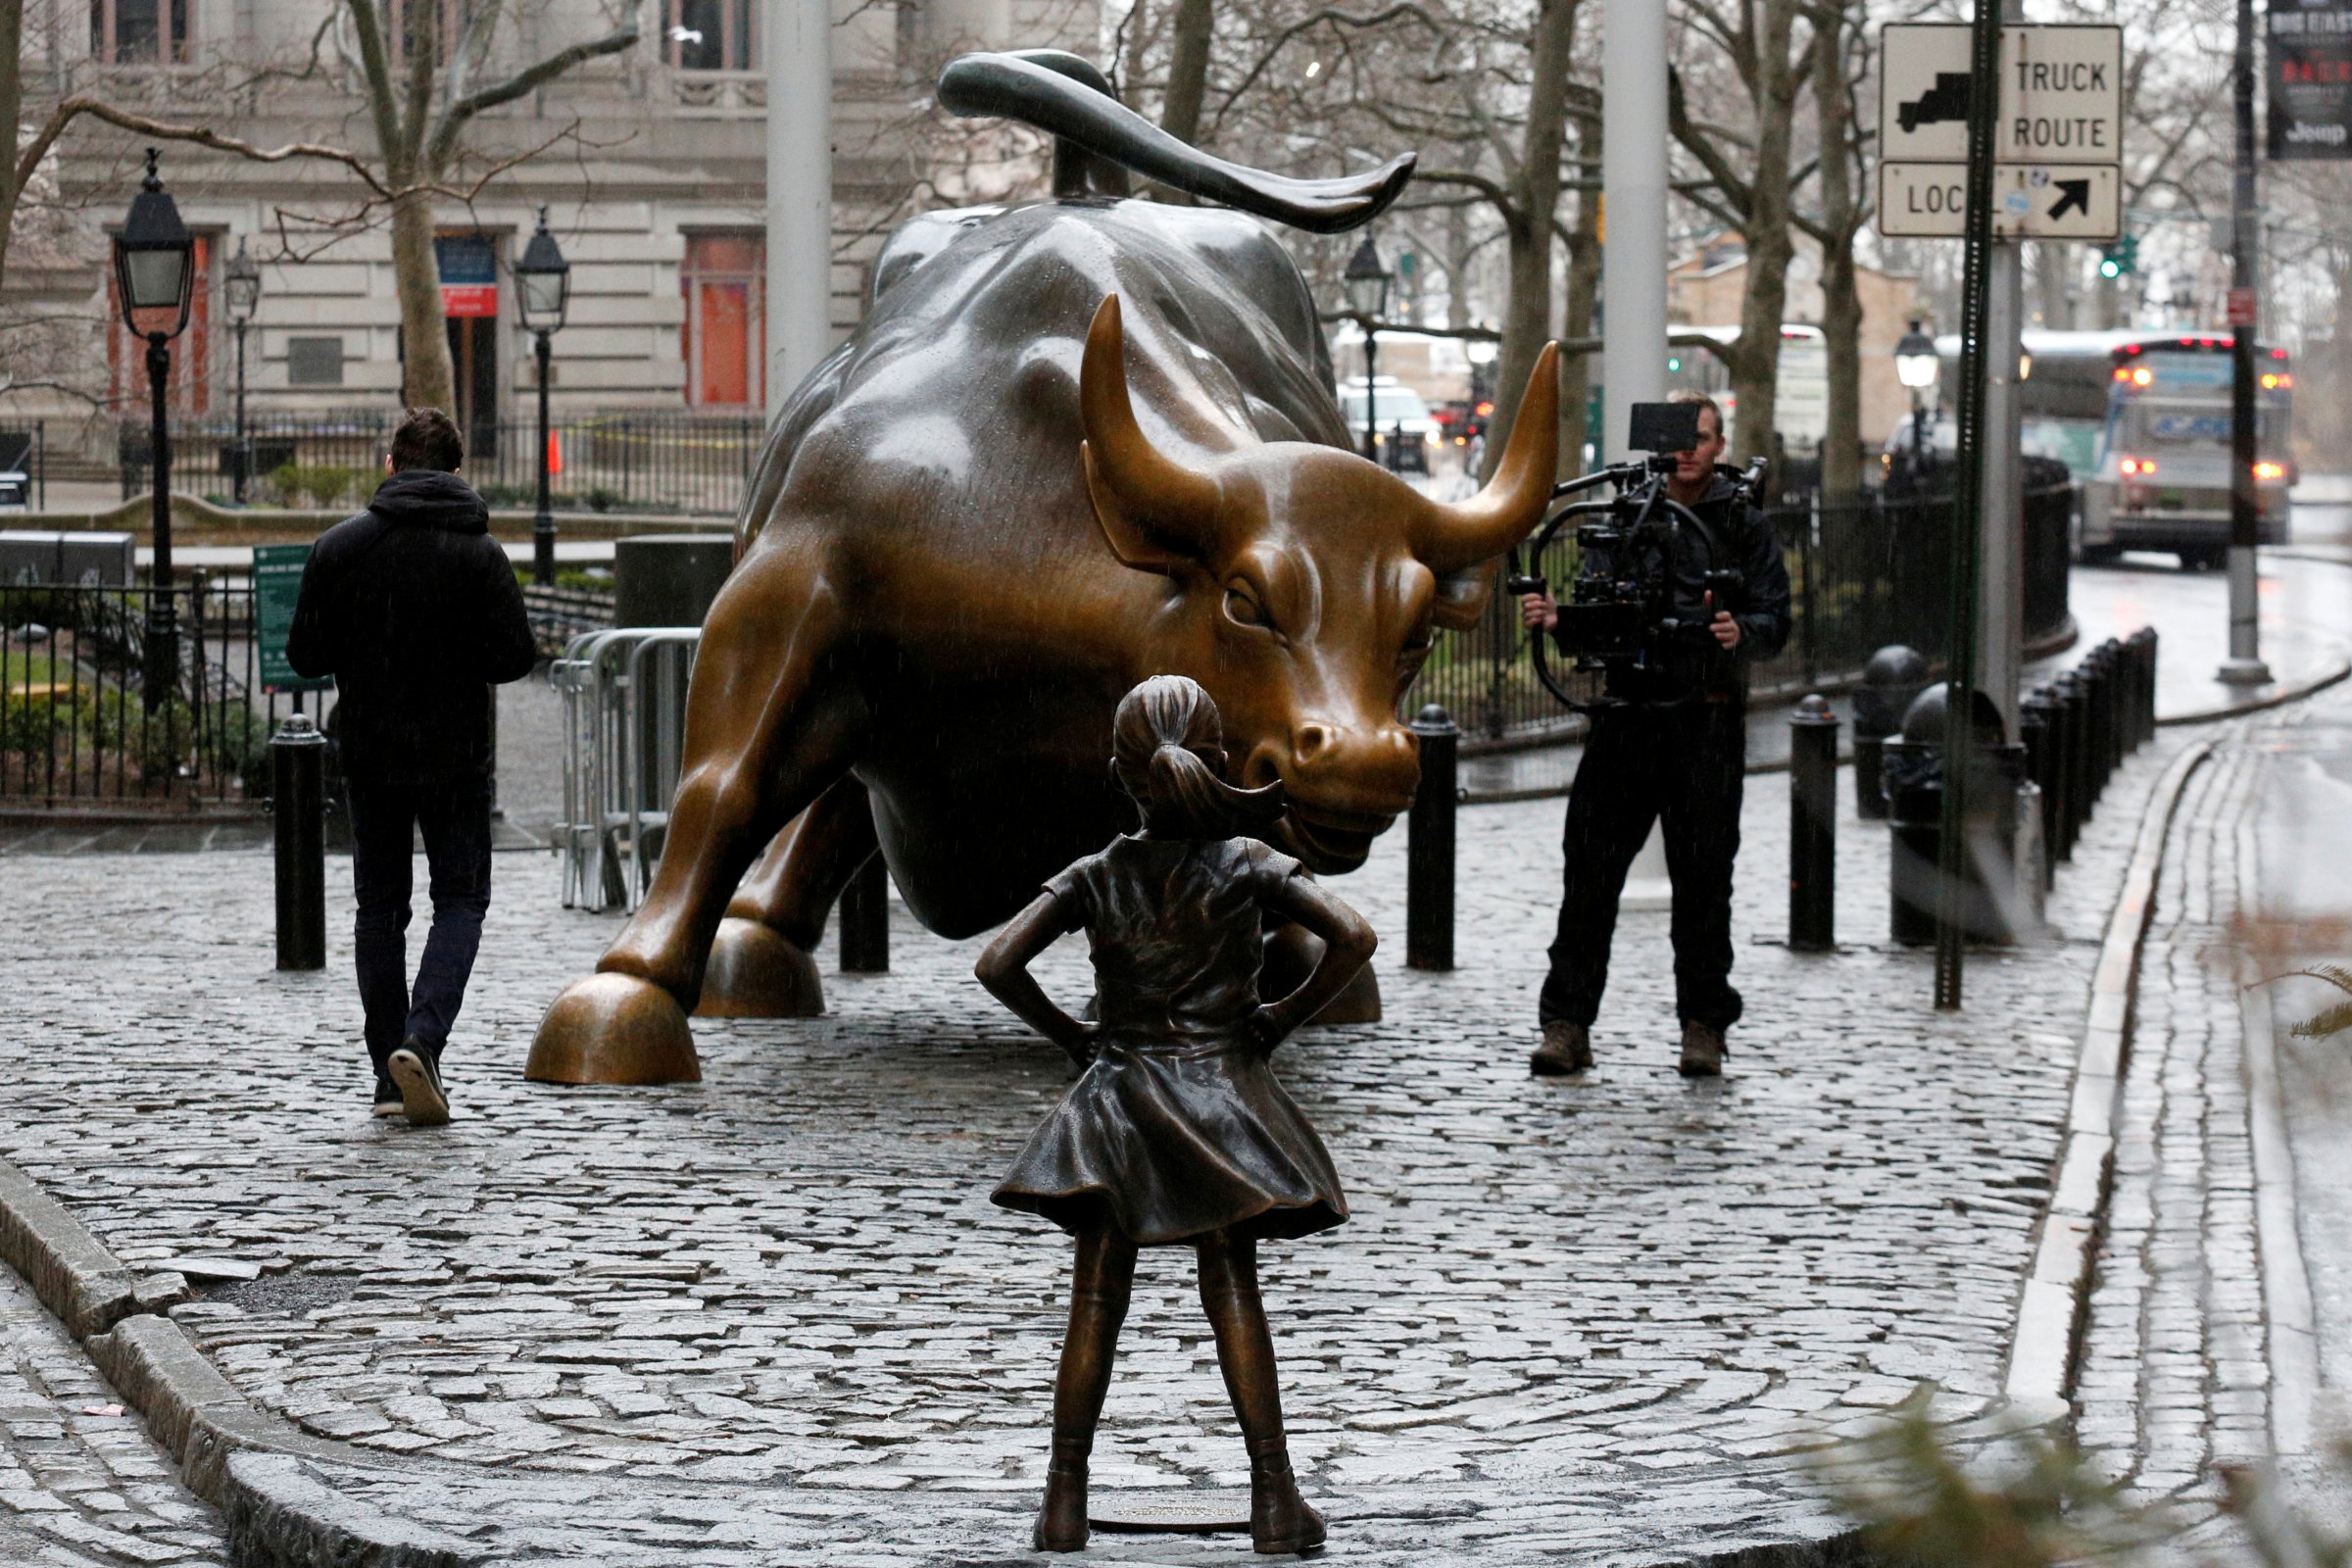 A camera man films a statue of a girl facing the Wall St. Bull, as part of a campaign by U.S. fund manager State Street to push companies to put women on their boards, in the financial district in New York